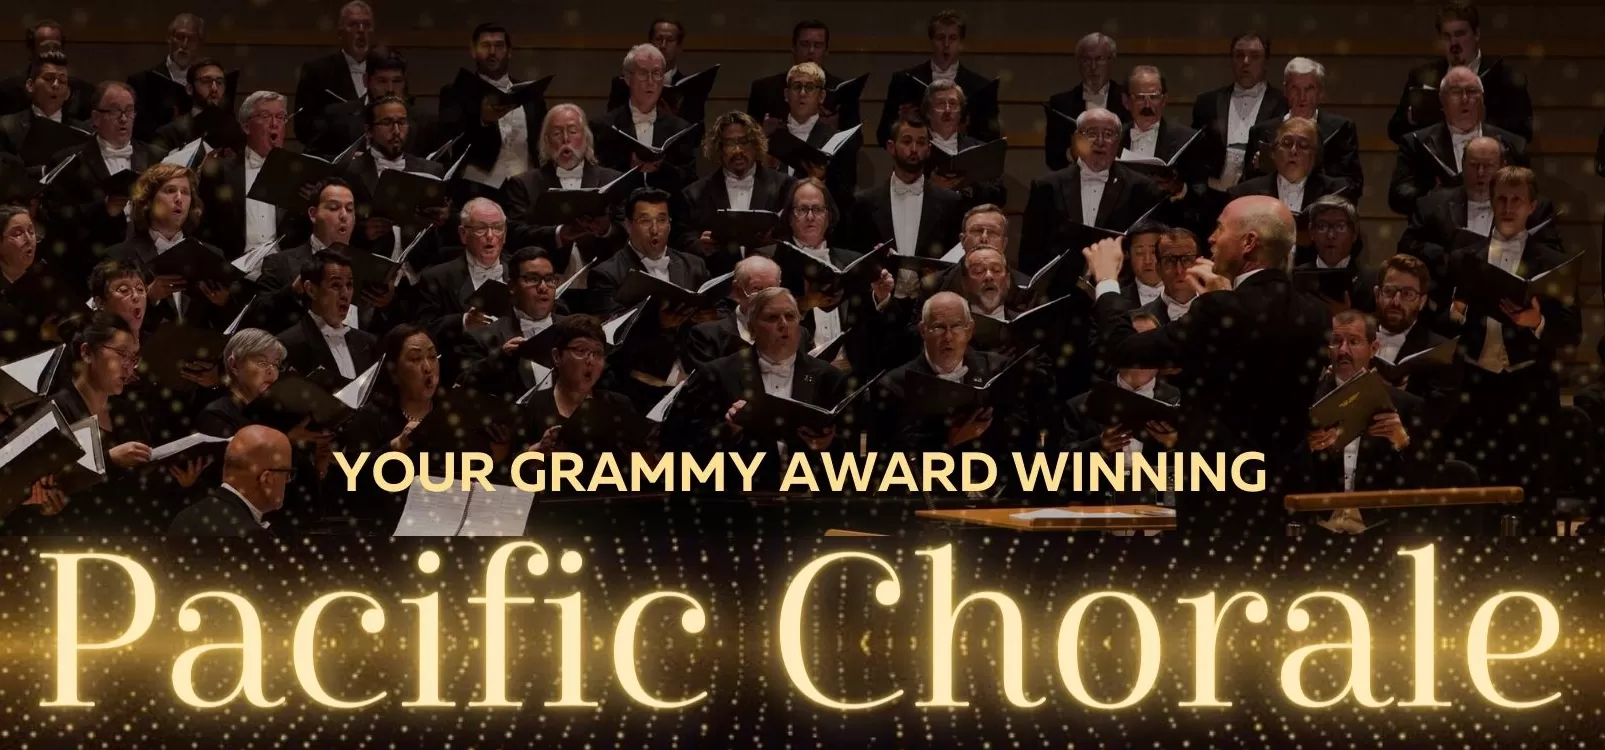 And the Winner for Best Choral Performance Goes To…